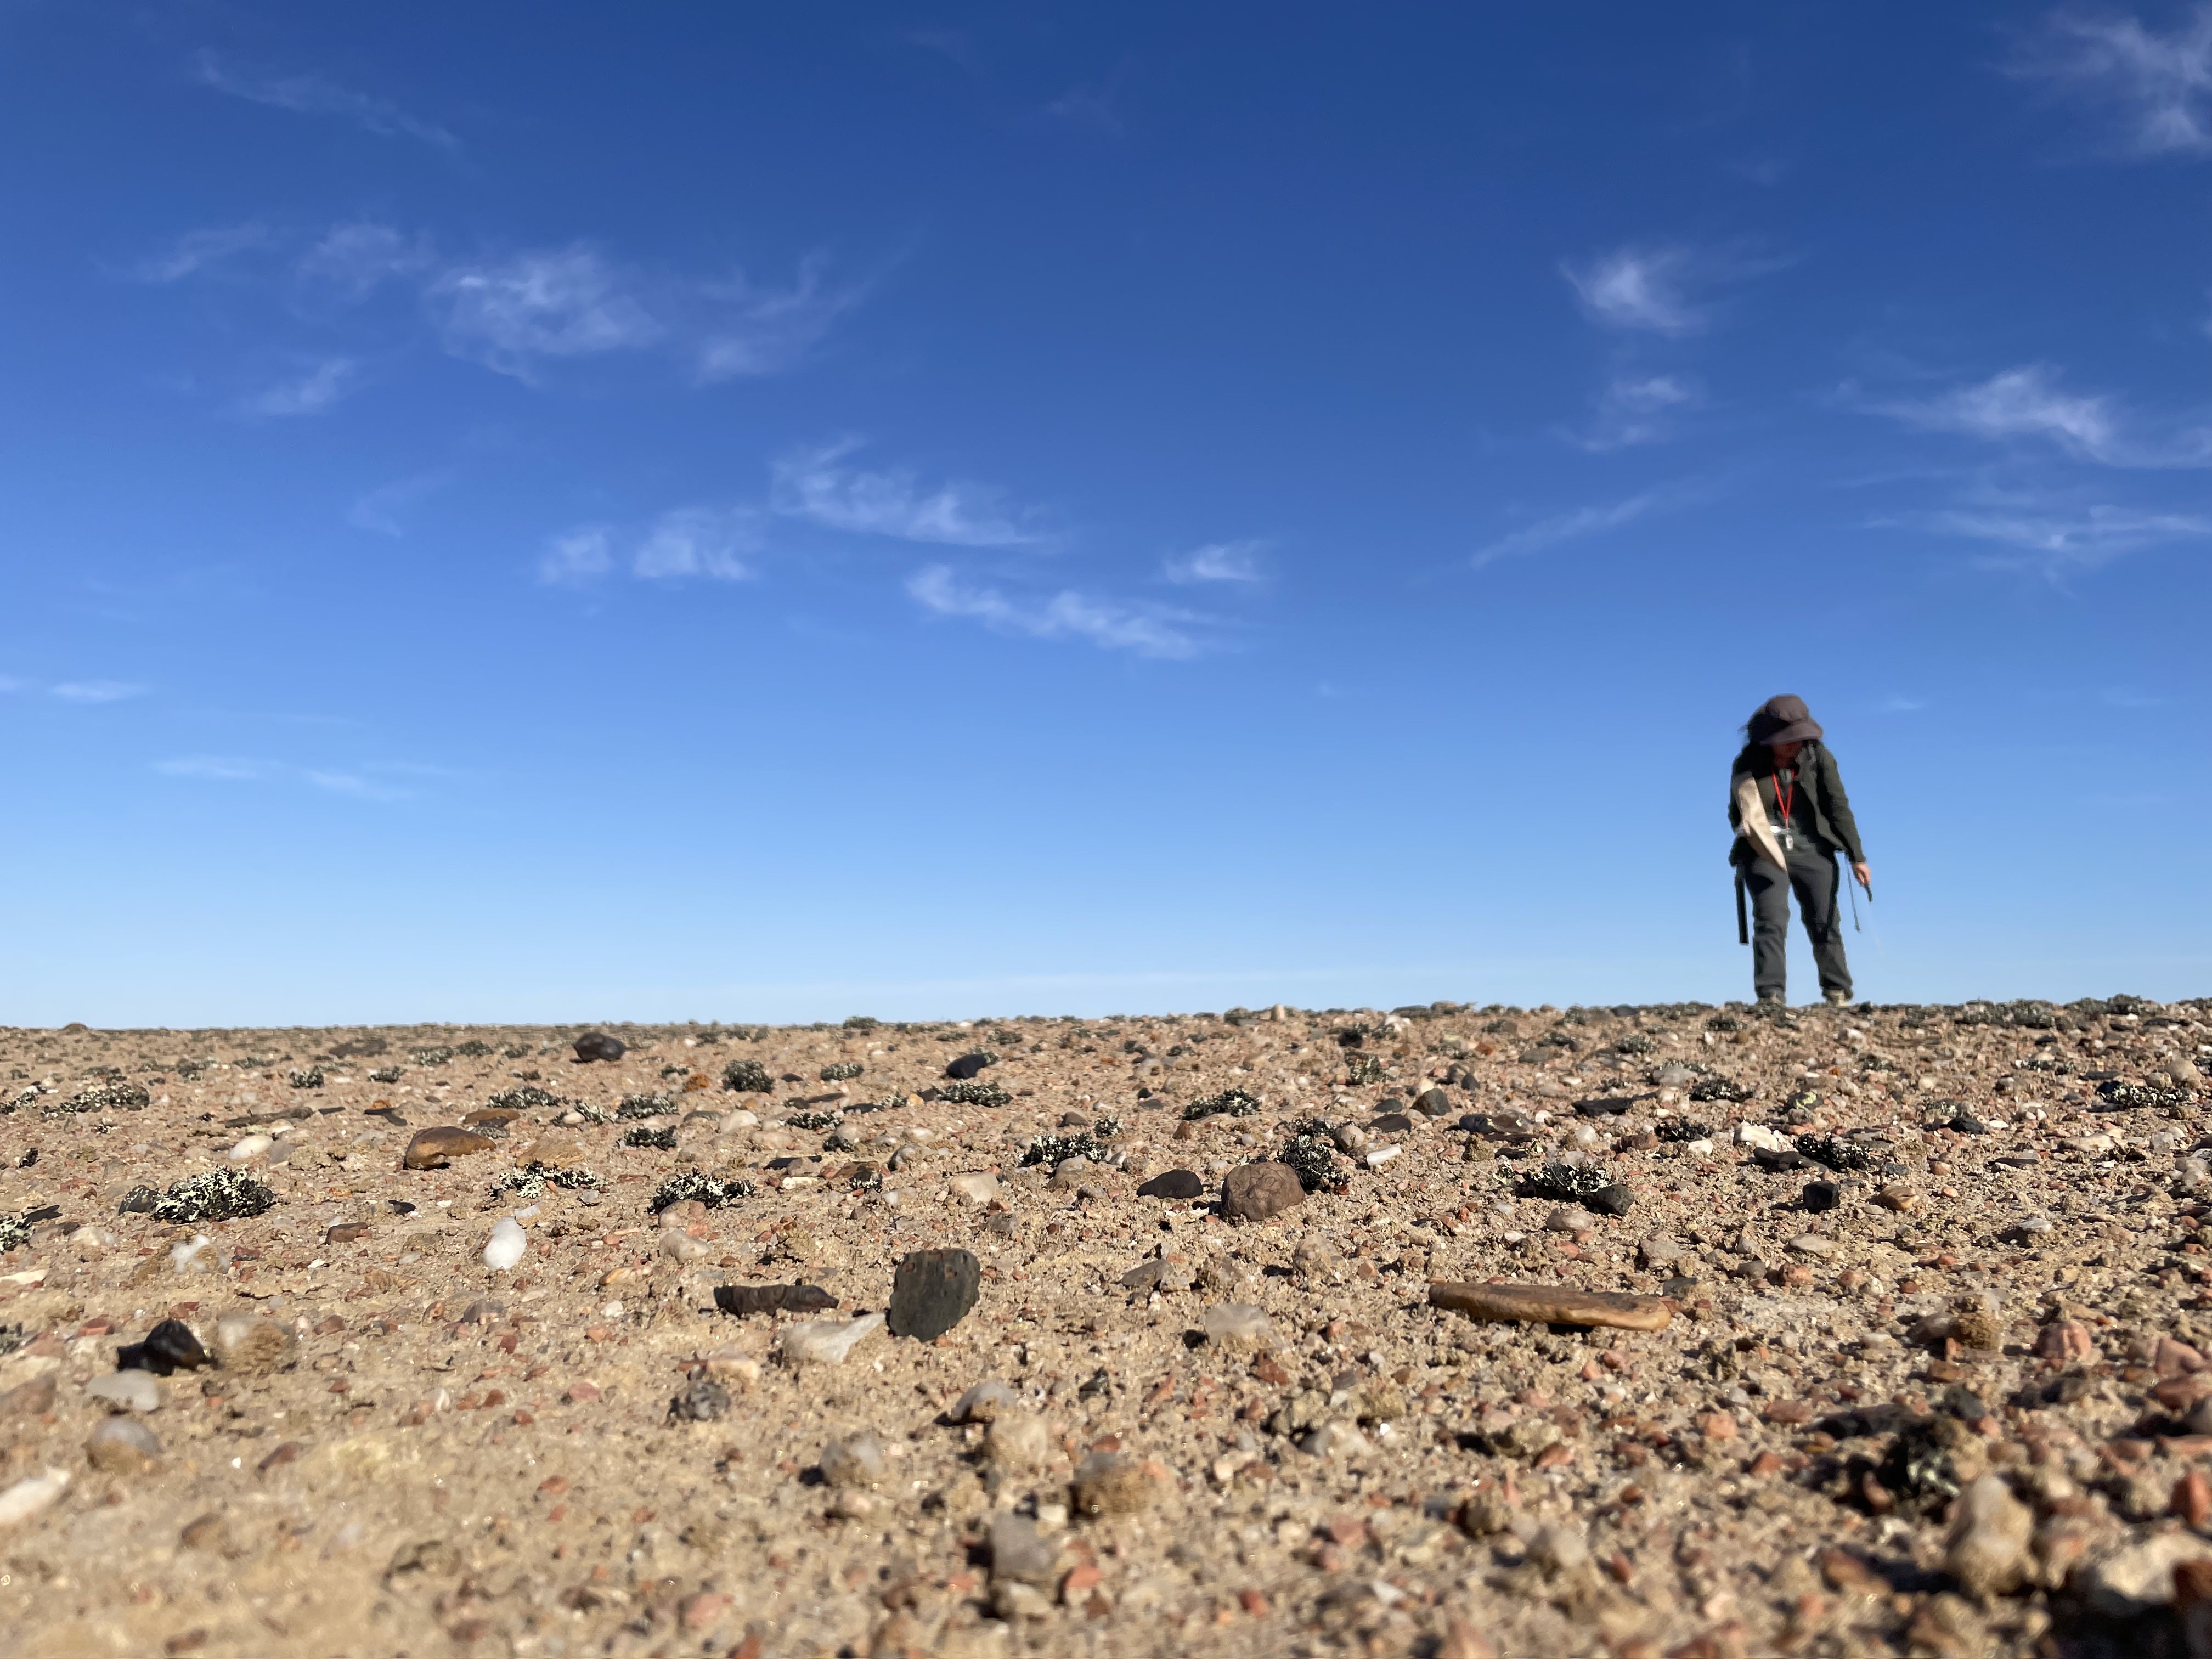 A woman stands under a clear blue sky in a flat world of rock and dirt.